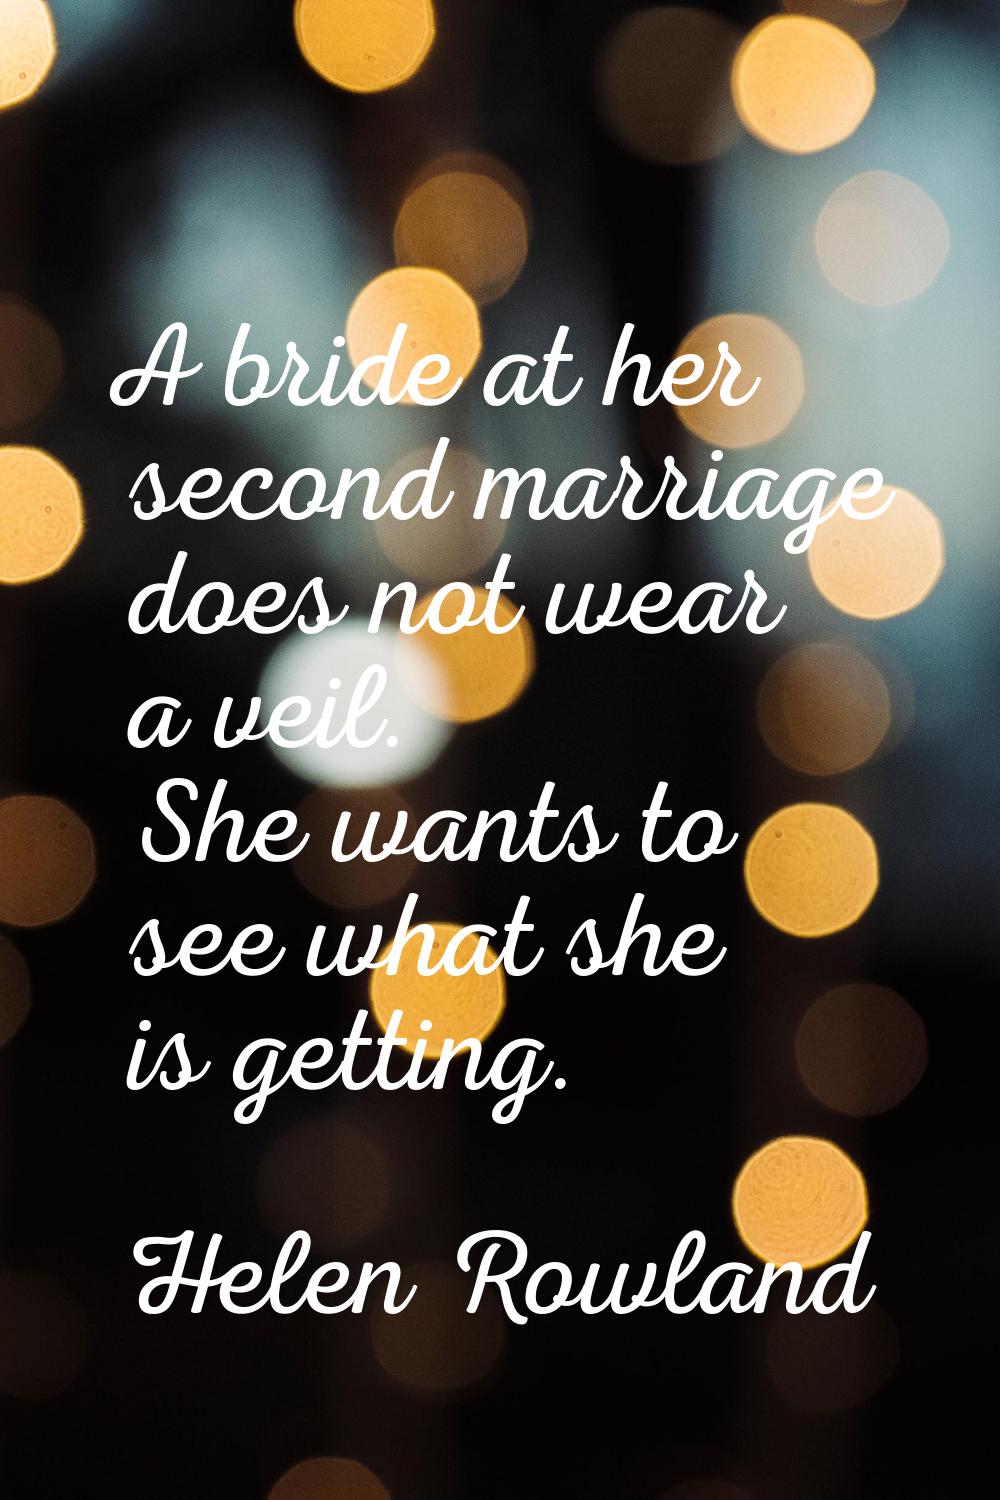 A bride at her second marriage does not wear a veil. She wants to see what she is getting.